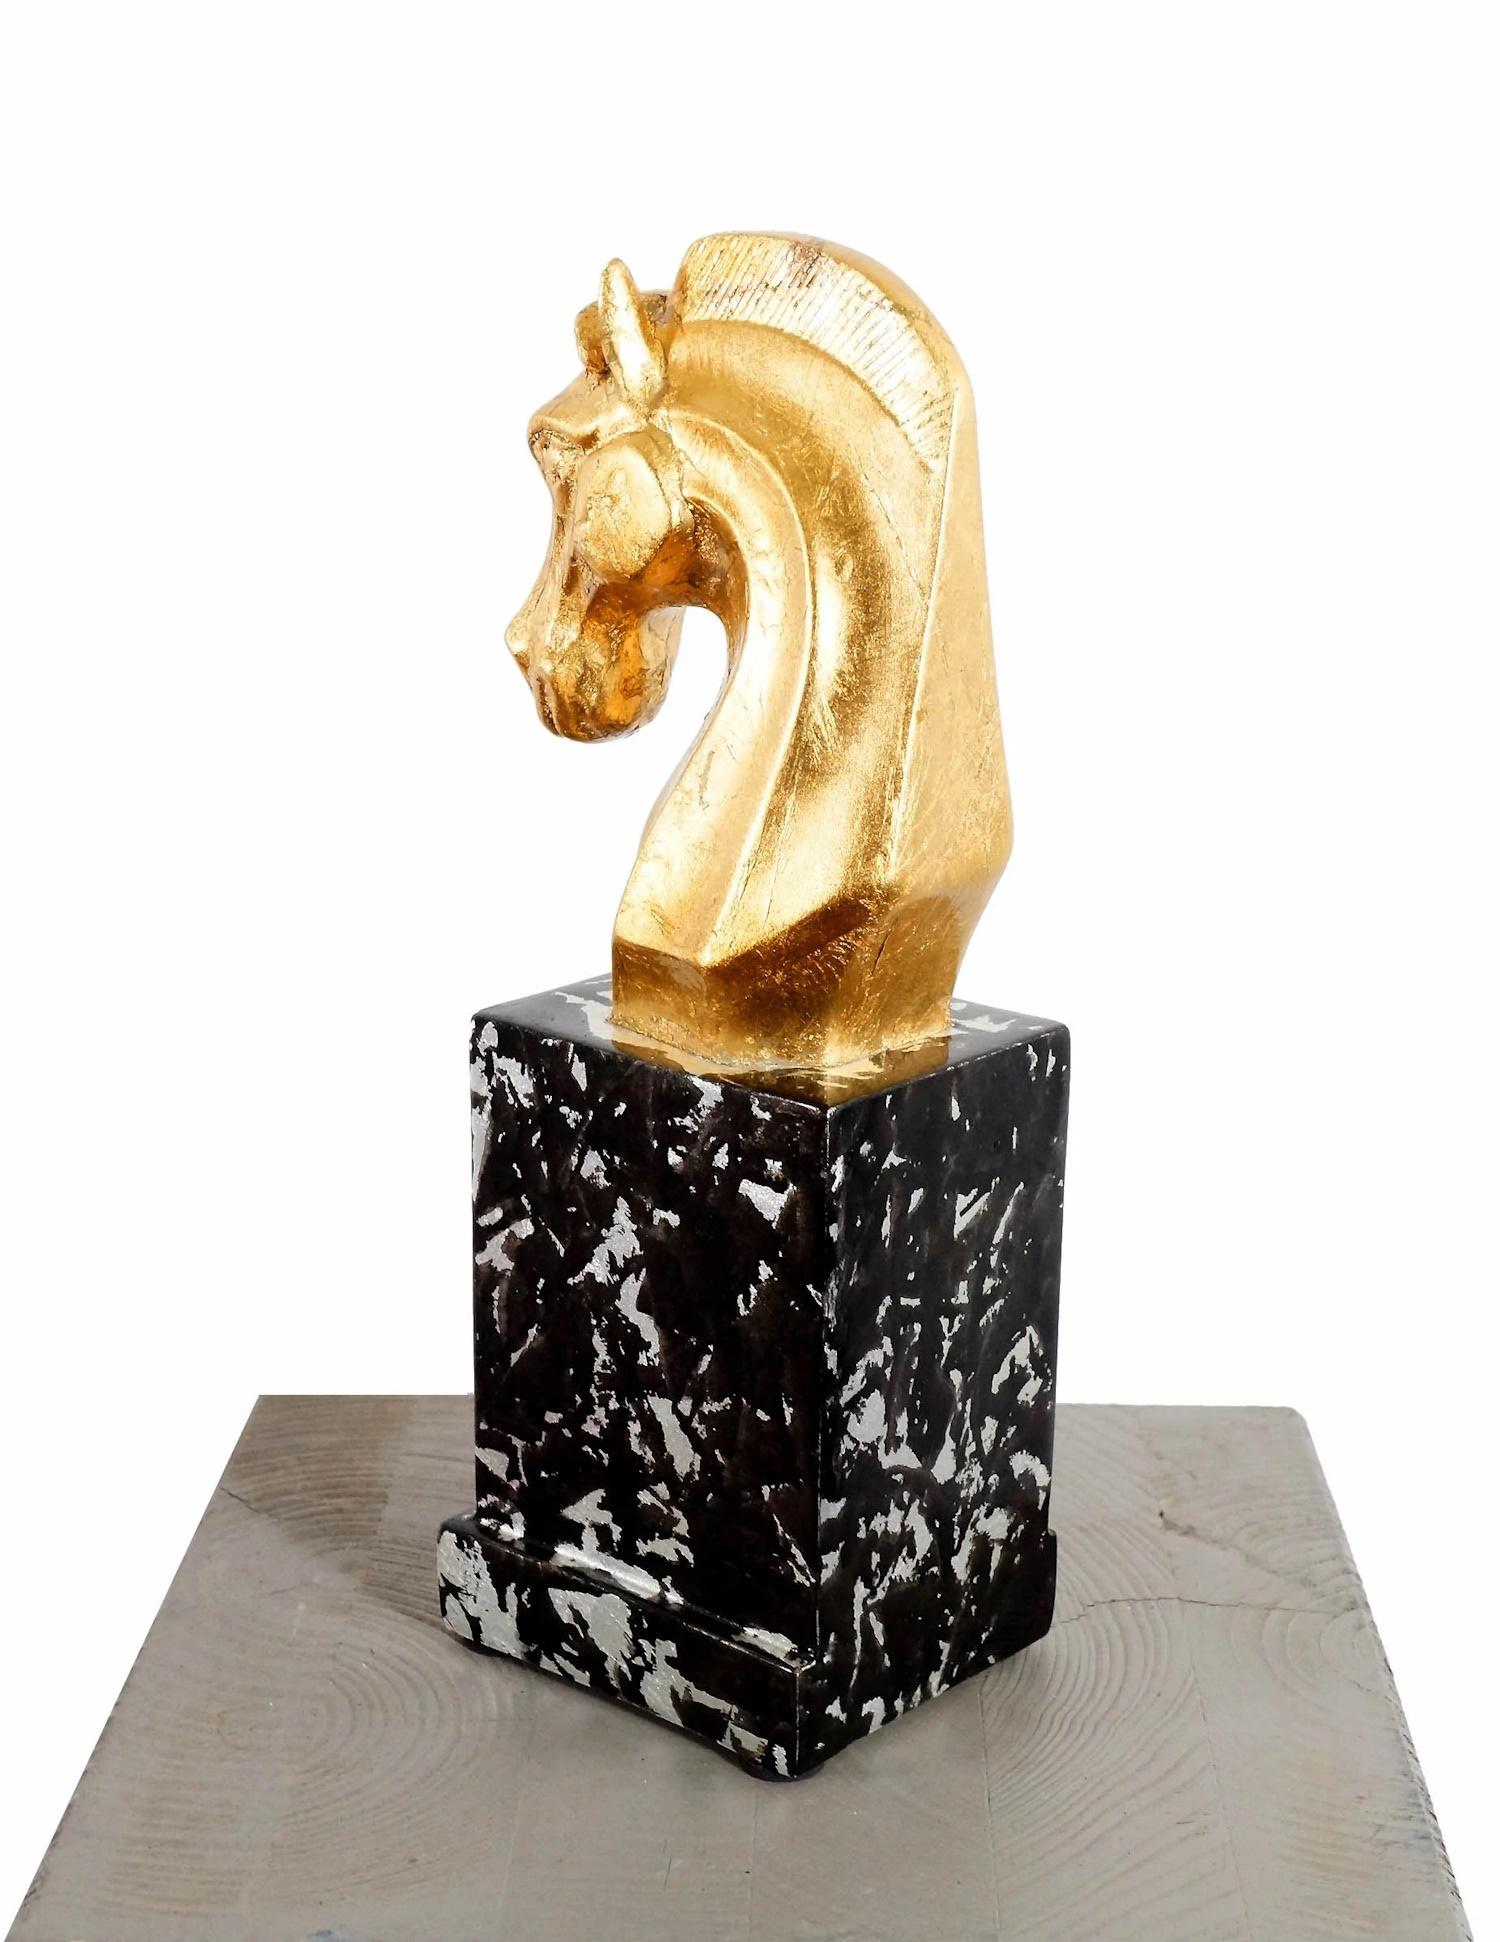 French Gilded Fibreglass Horse Head Sculpture, Contemporary Work, XXIst Century. For Sale